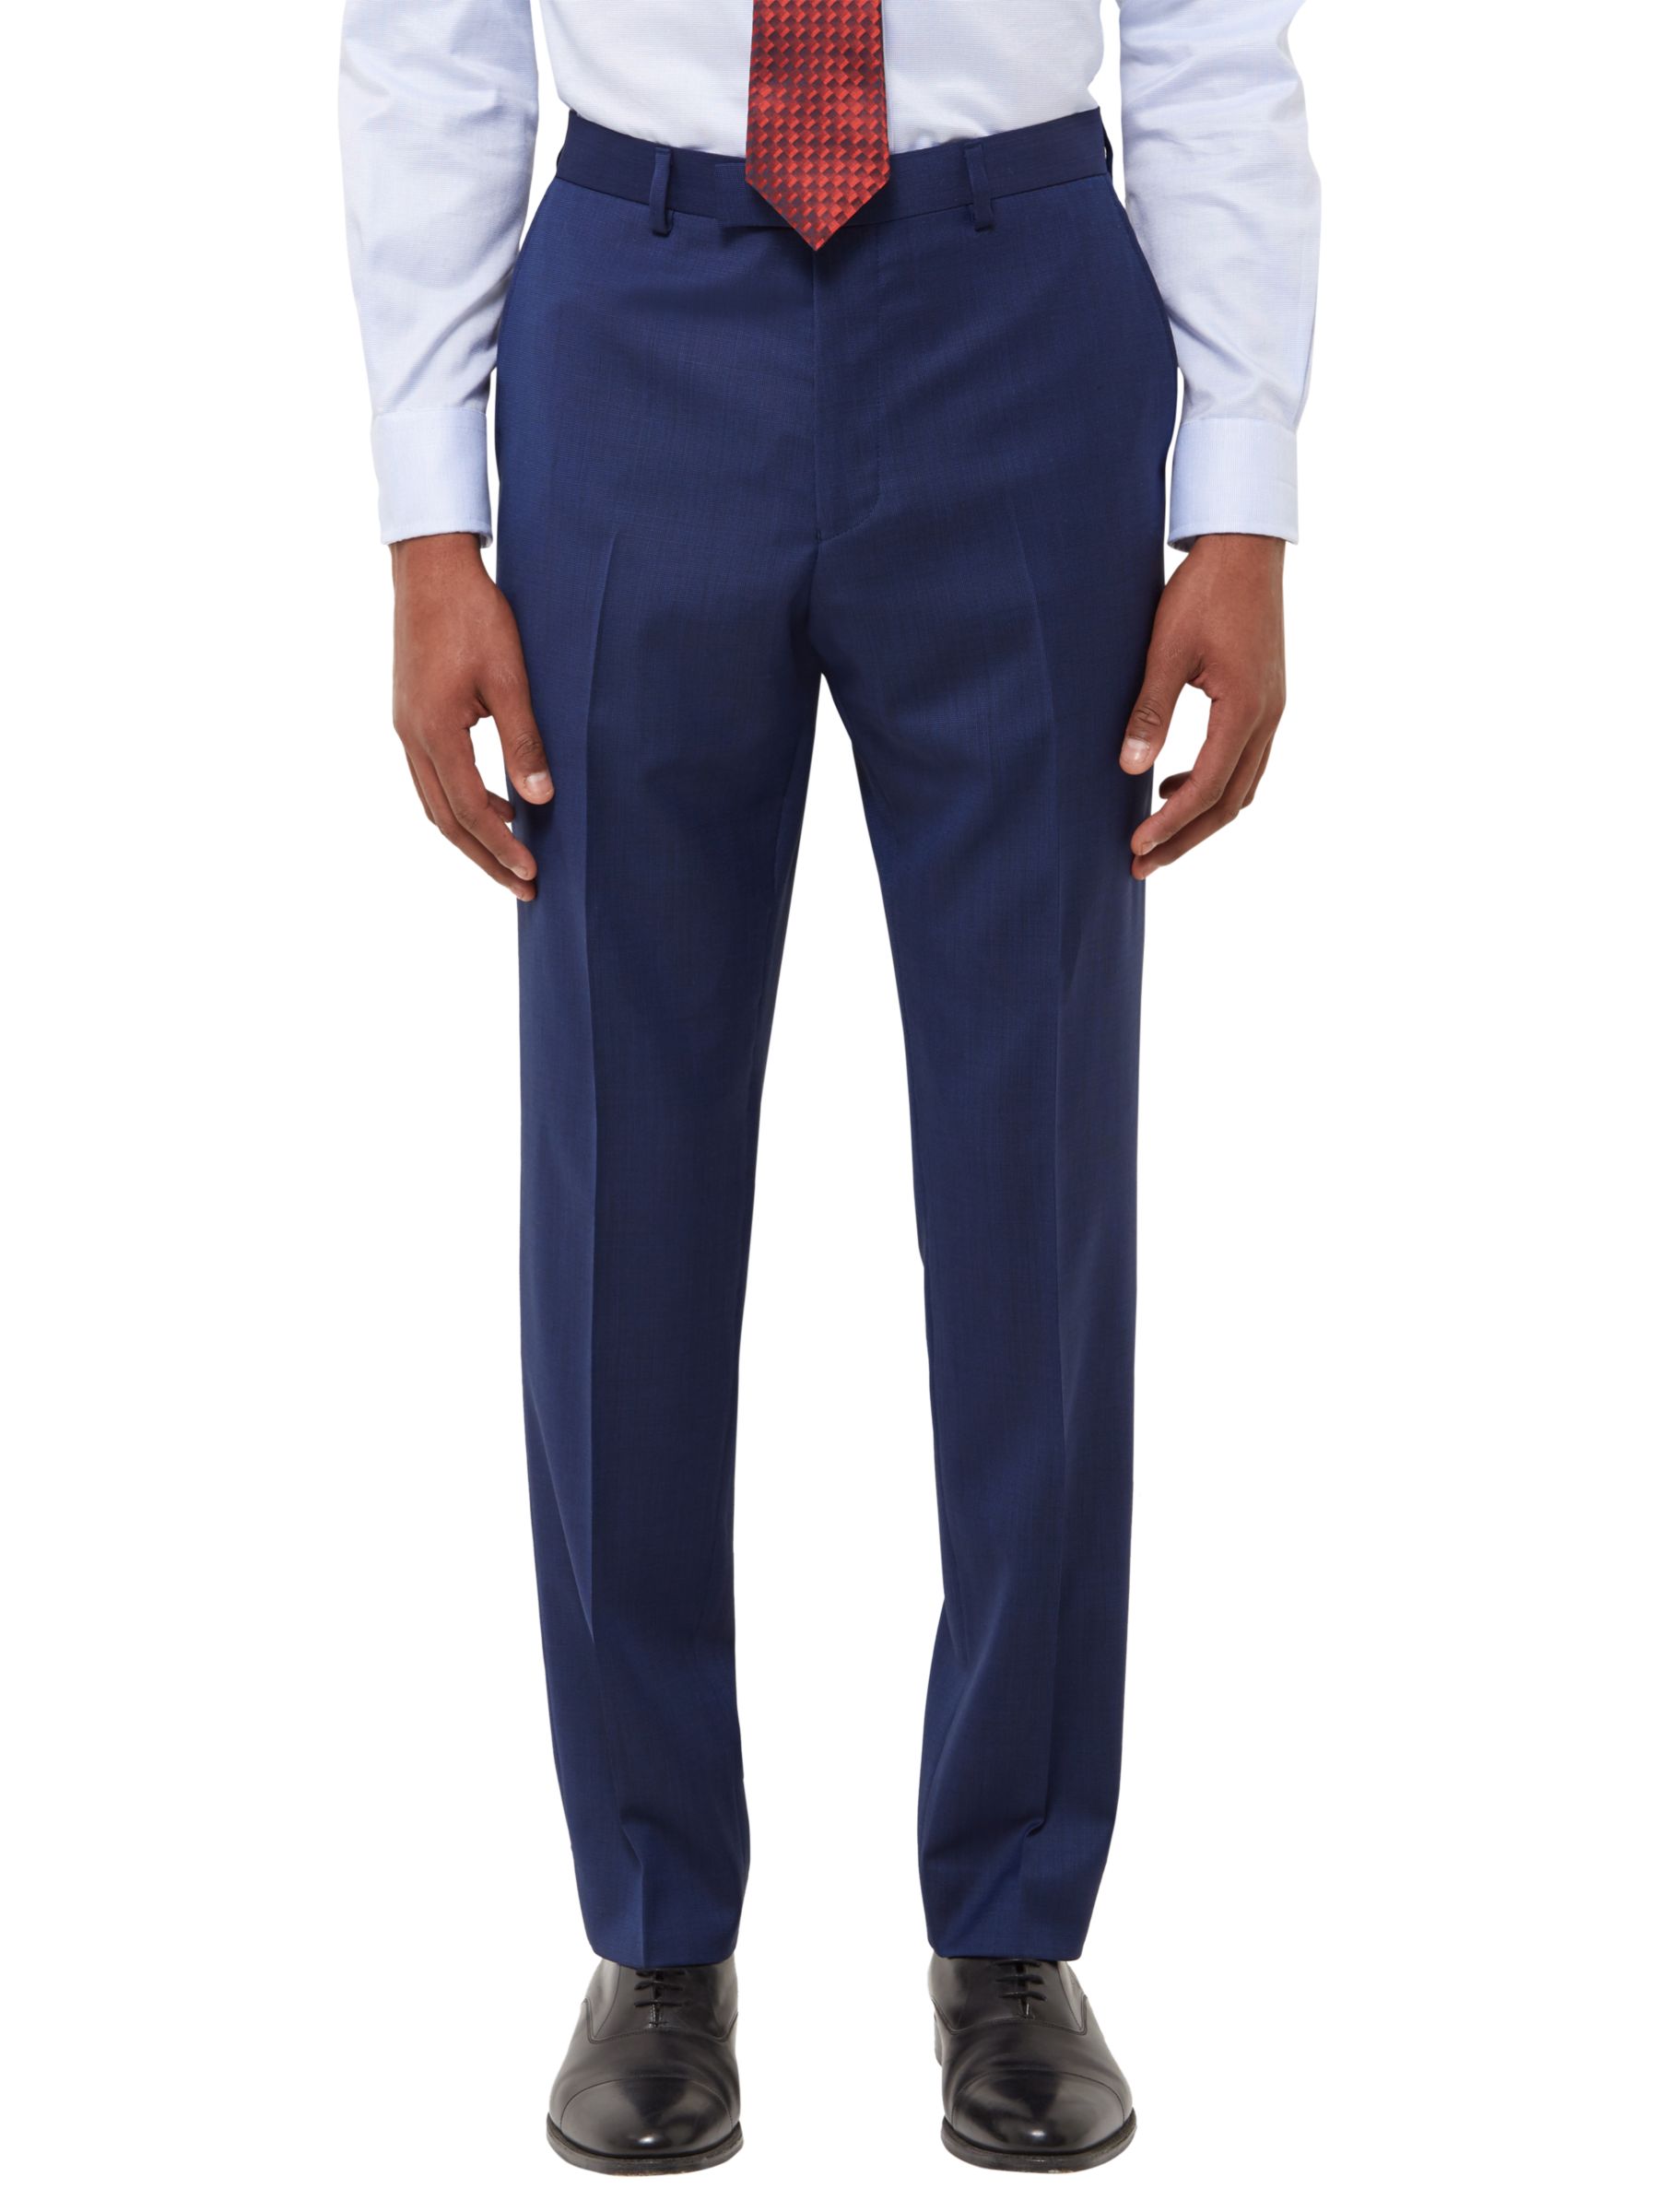 Jaeger Wool Twill Slim Fit Suit Trousers Review